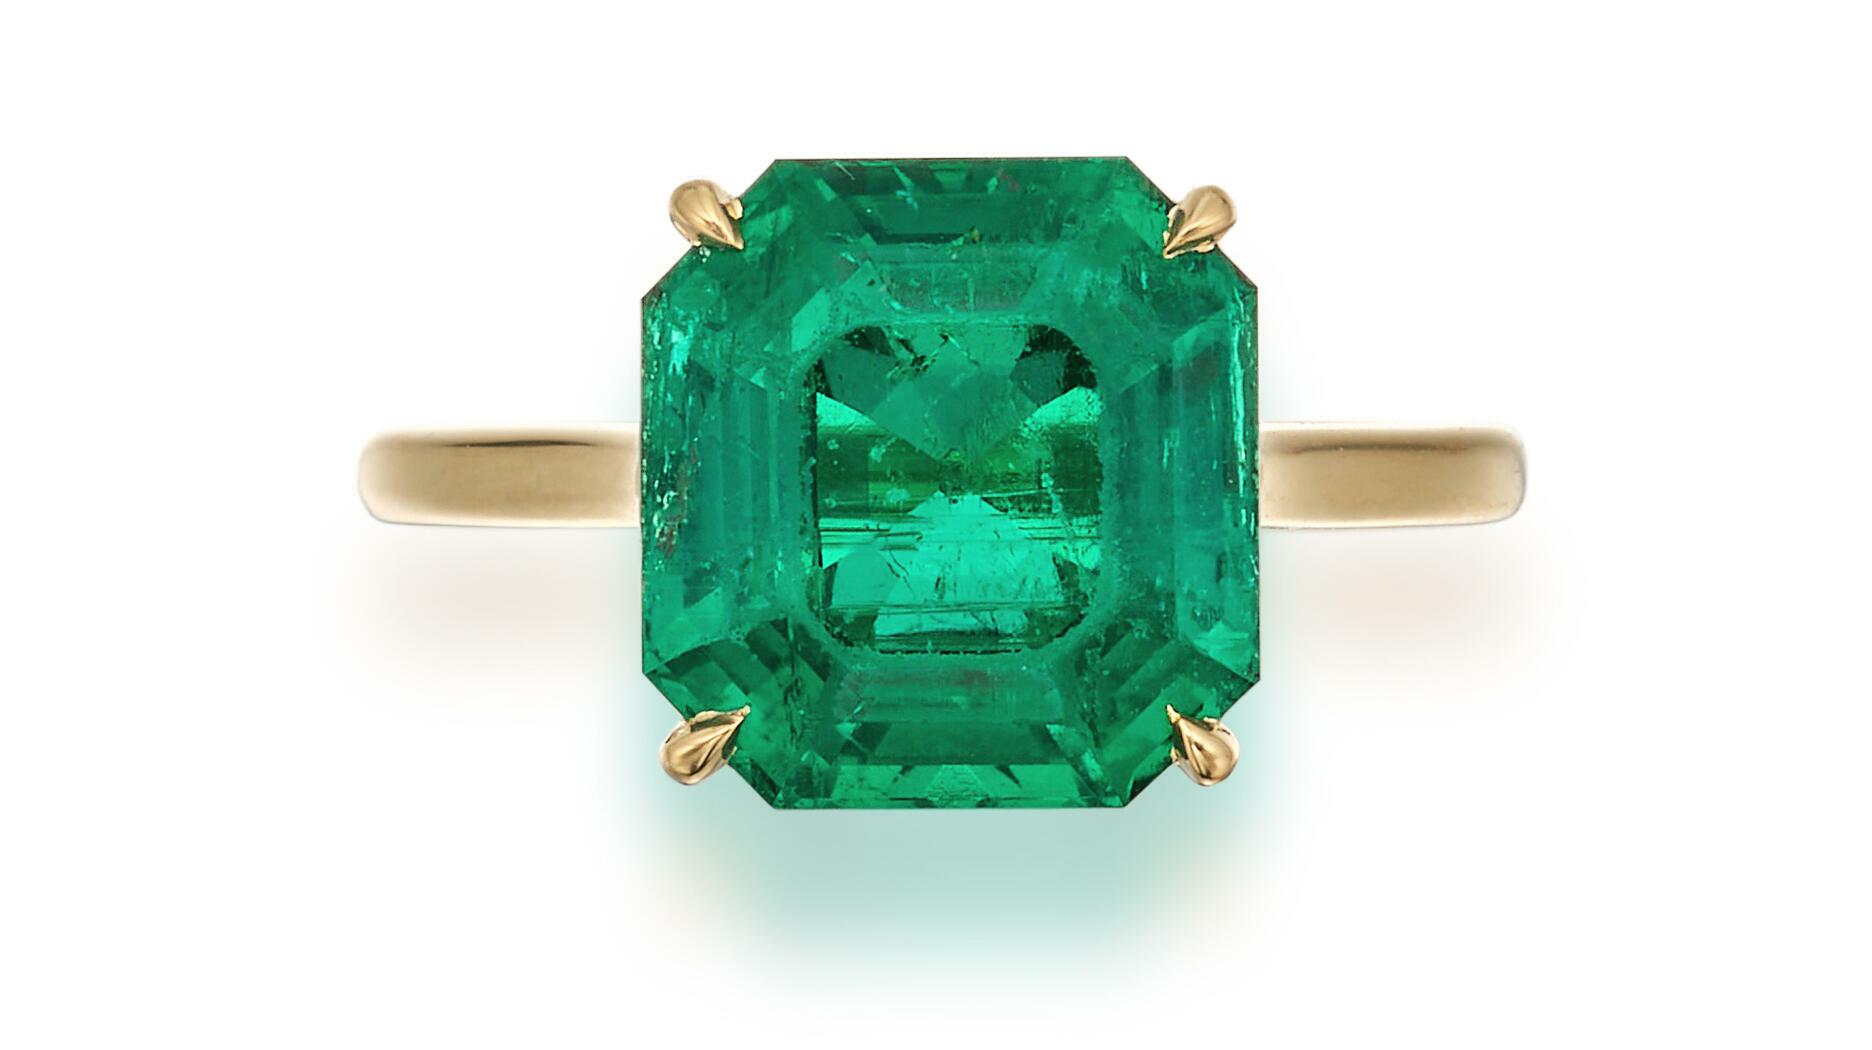 Shipwreck Emerald Sells for More Than $1M at Auction 